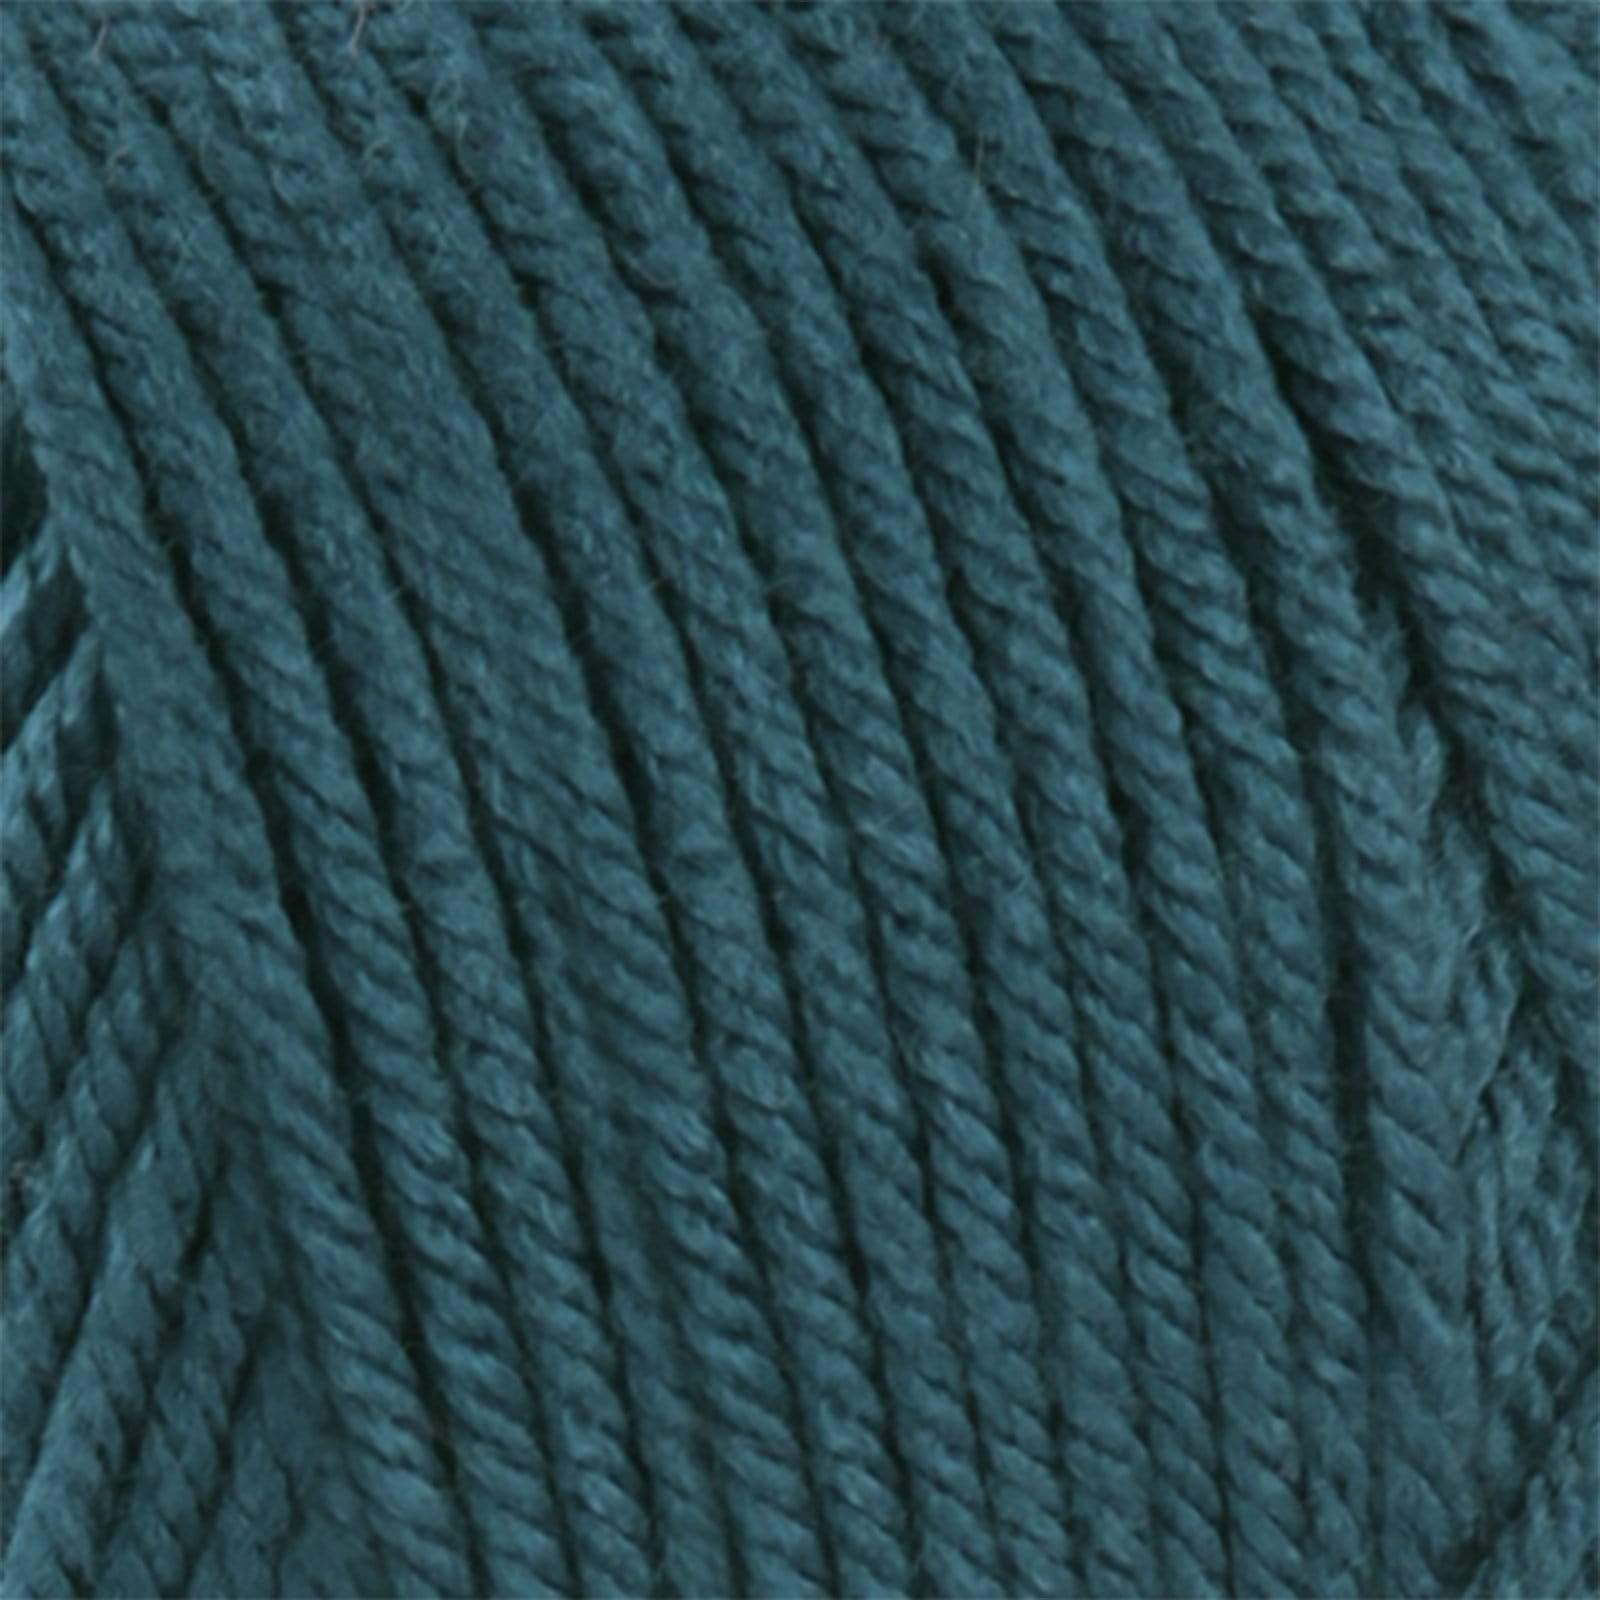 Premier Anti-Pilling Everyday Worsted Yarn-Pine Green, 1 count